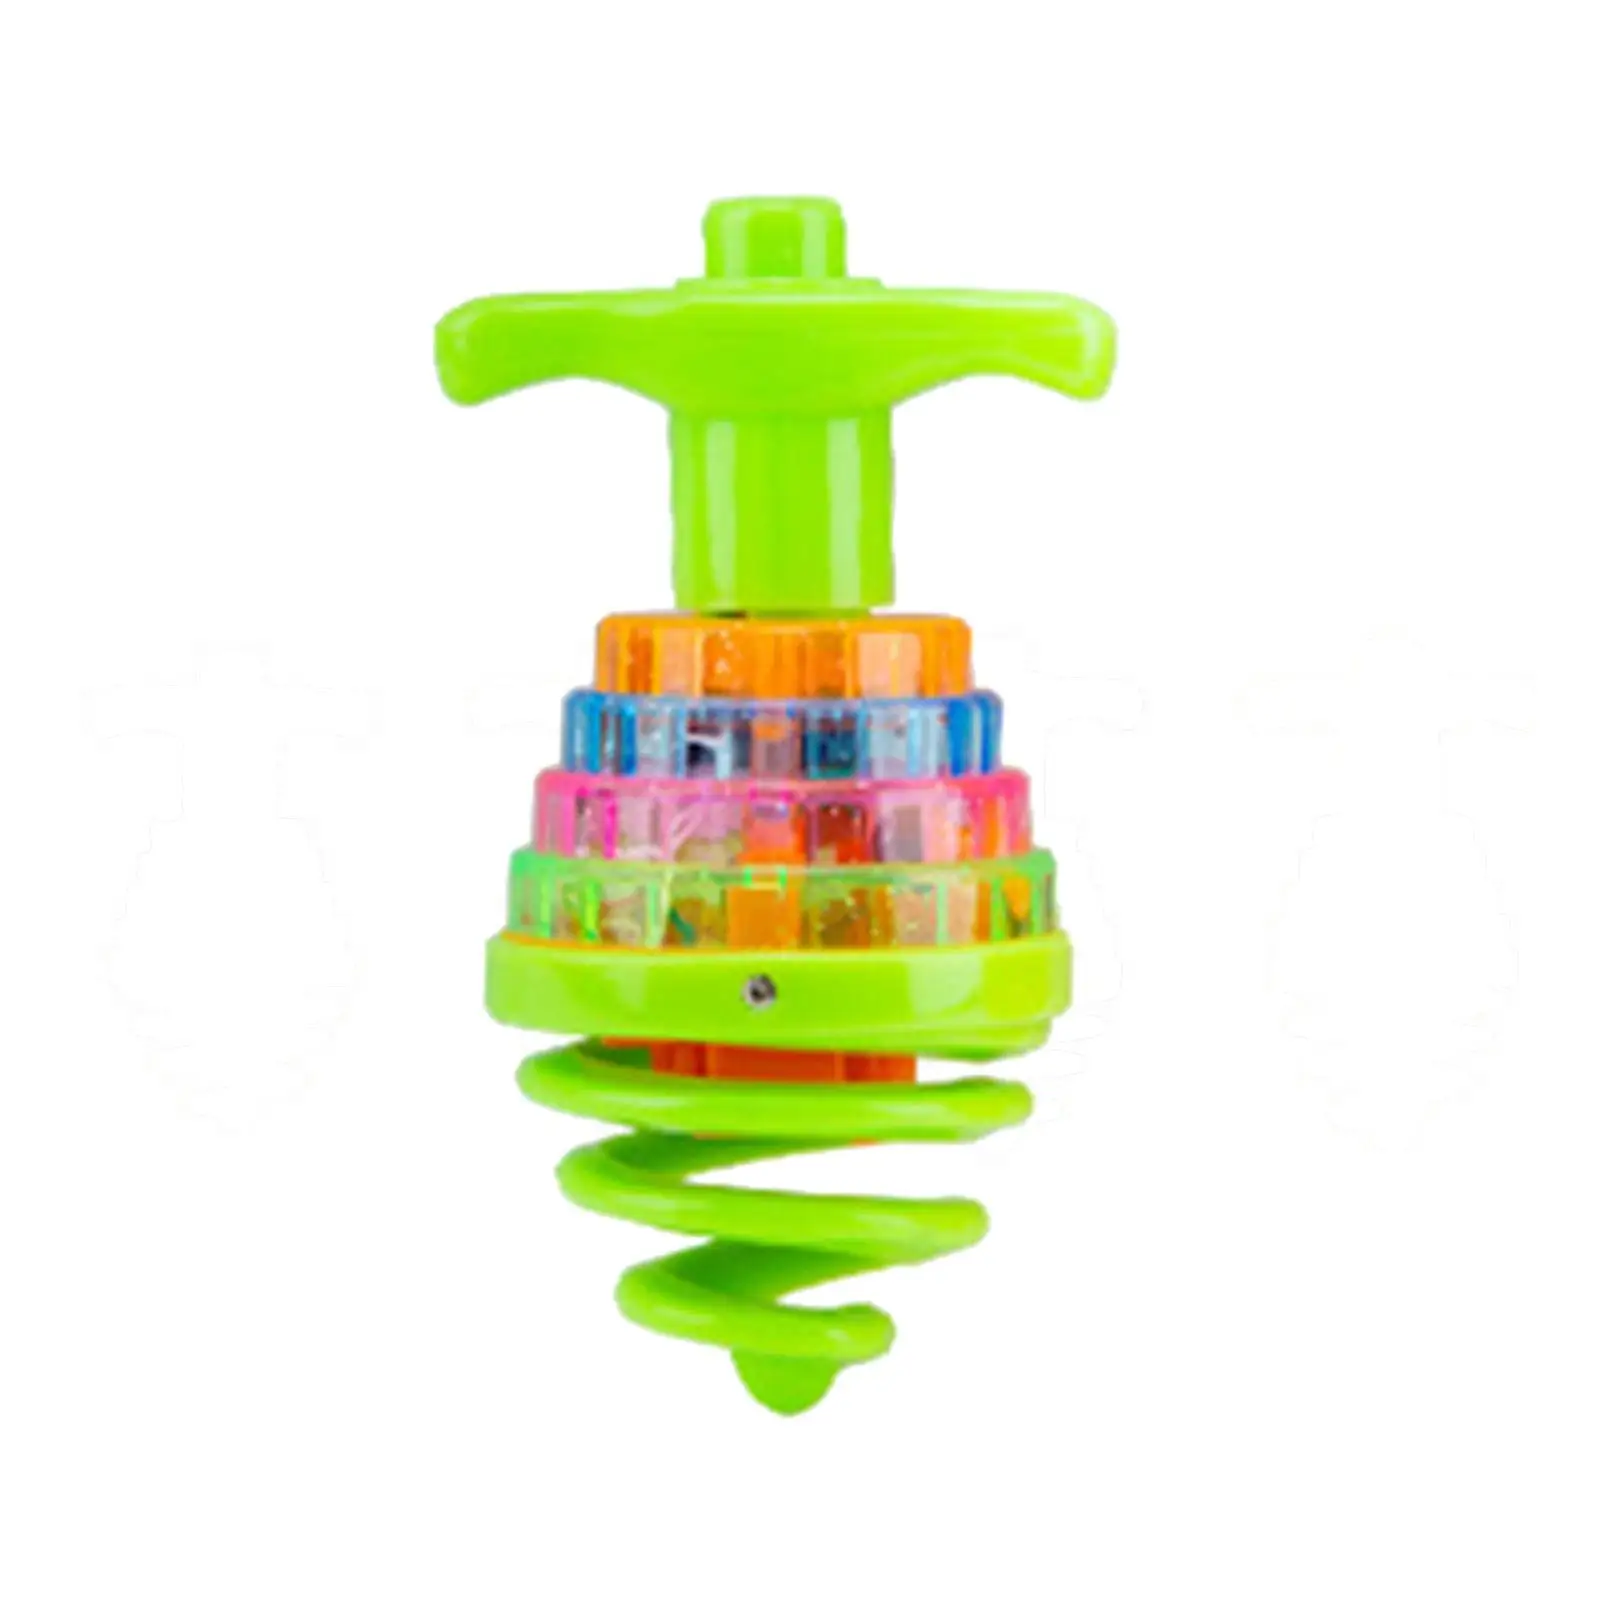 LED Music and Flash Light Glow Spiral Rotating Wheel Gyro Easy to Hold Novelty Gyro Peg Toy for Classic Toy Party Favor